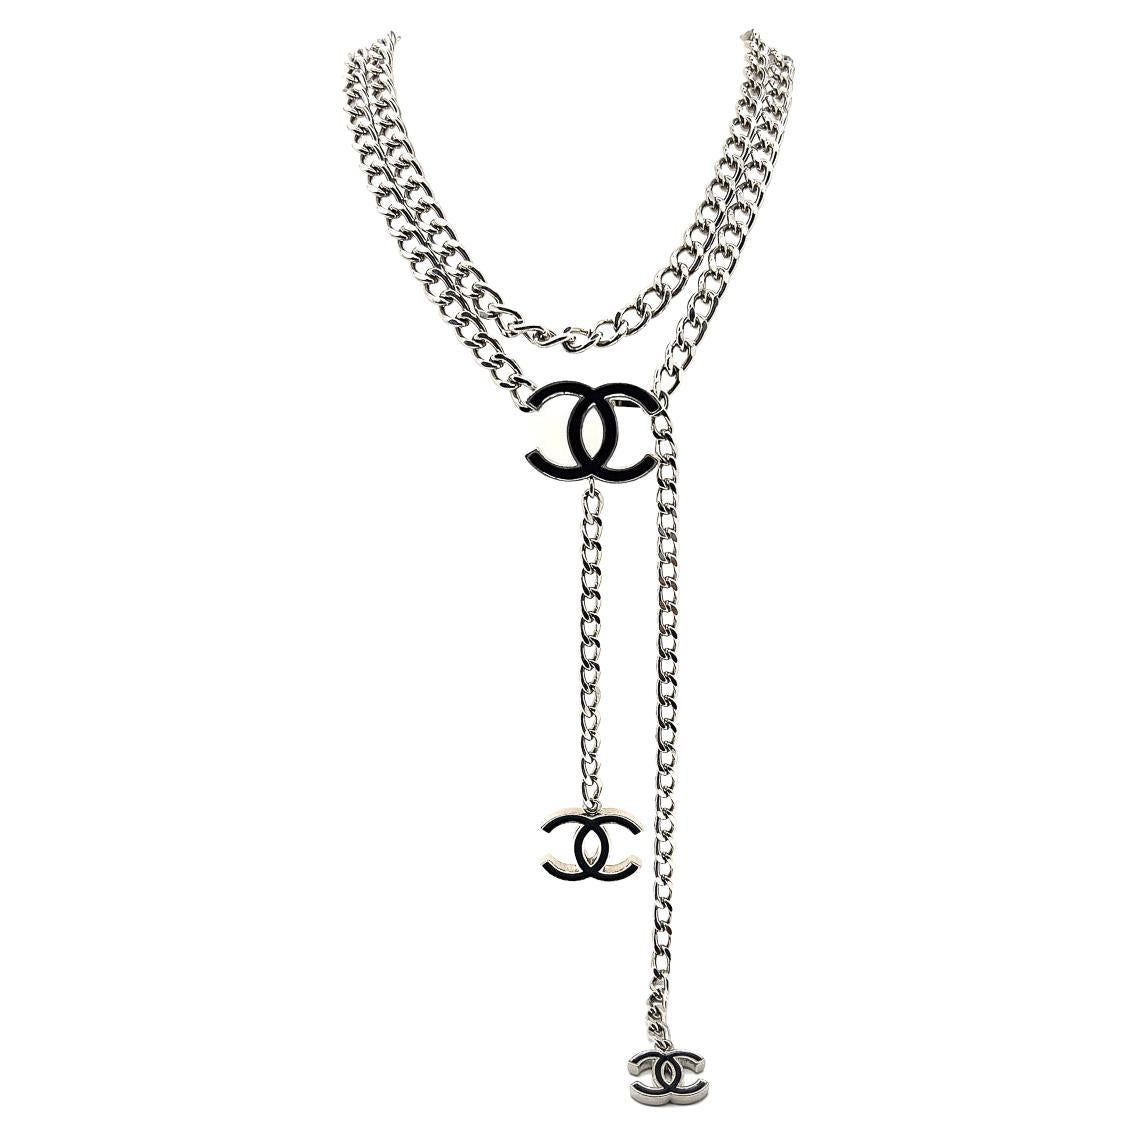 Chanel Heart Chain - 122 For Sale on 1stDibs  chanel heart necklace price, heart  necklace chanel, chanel necklace heart